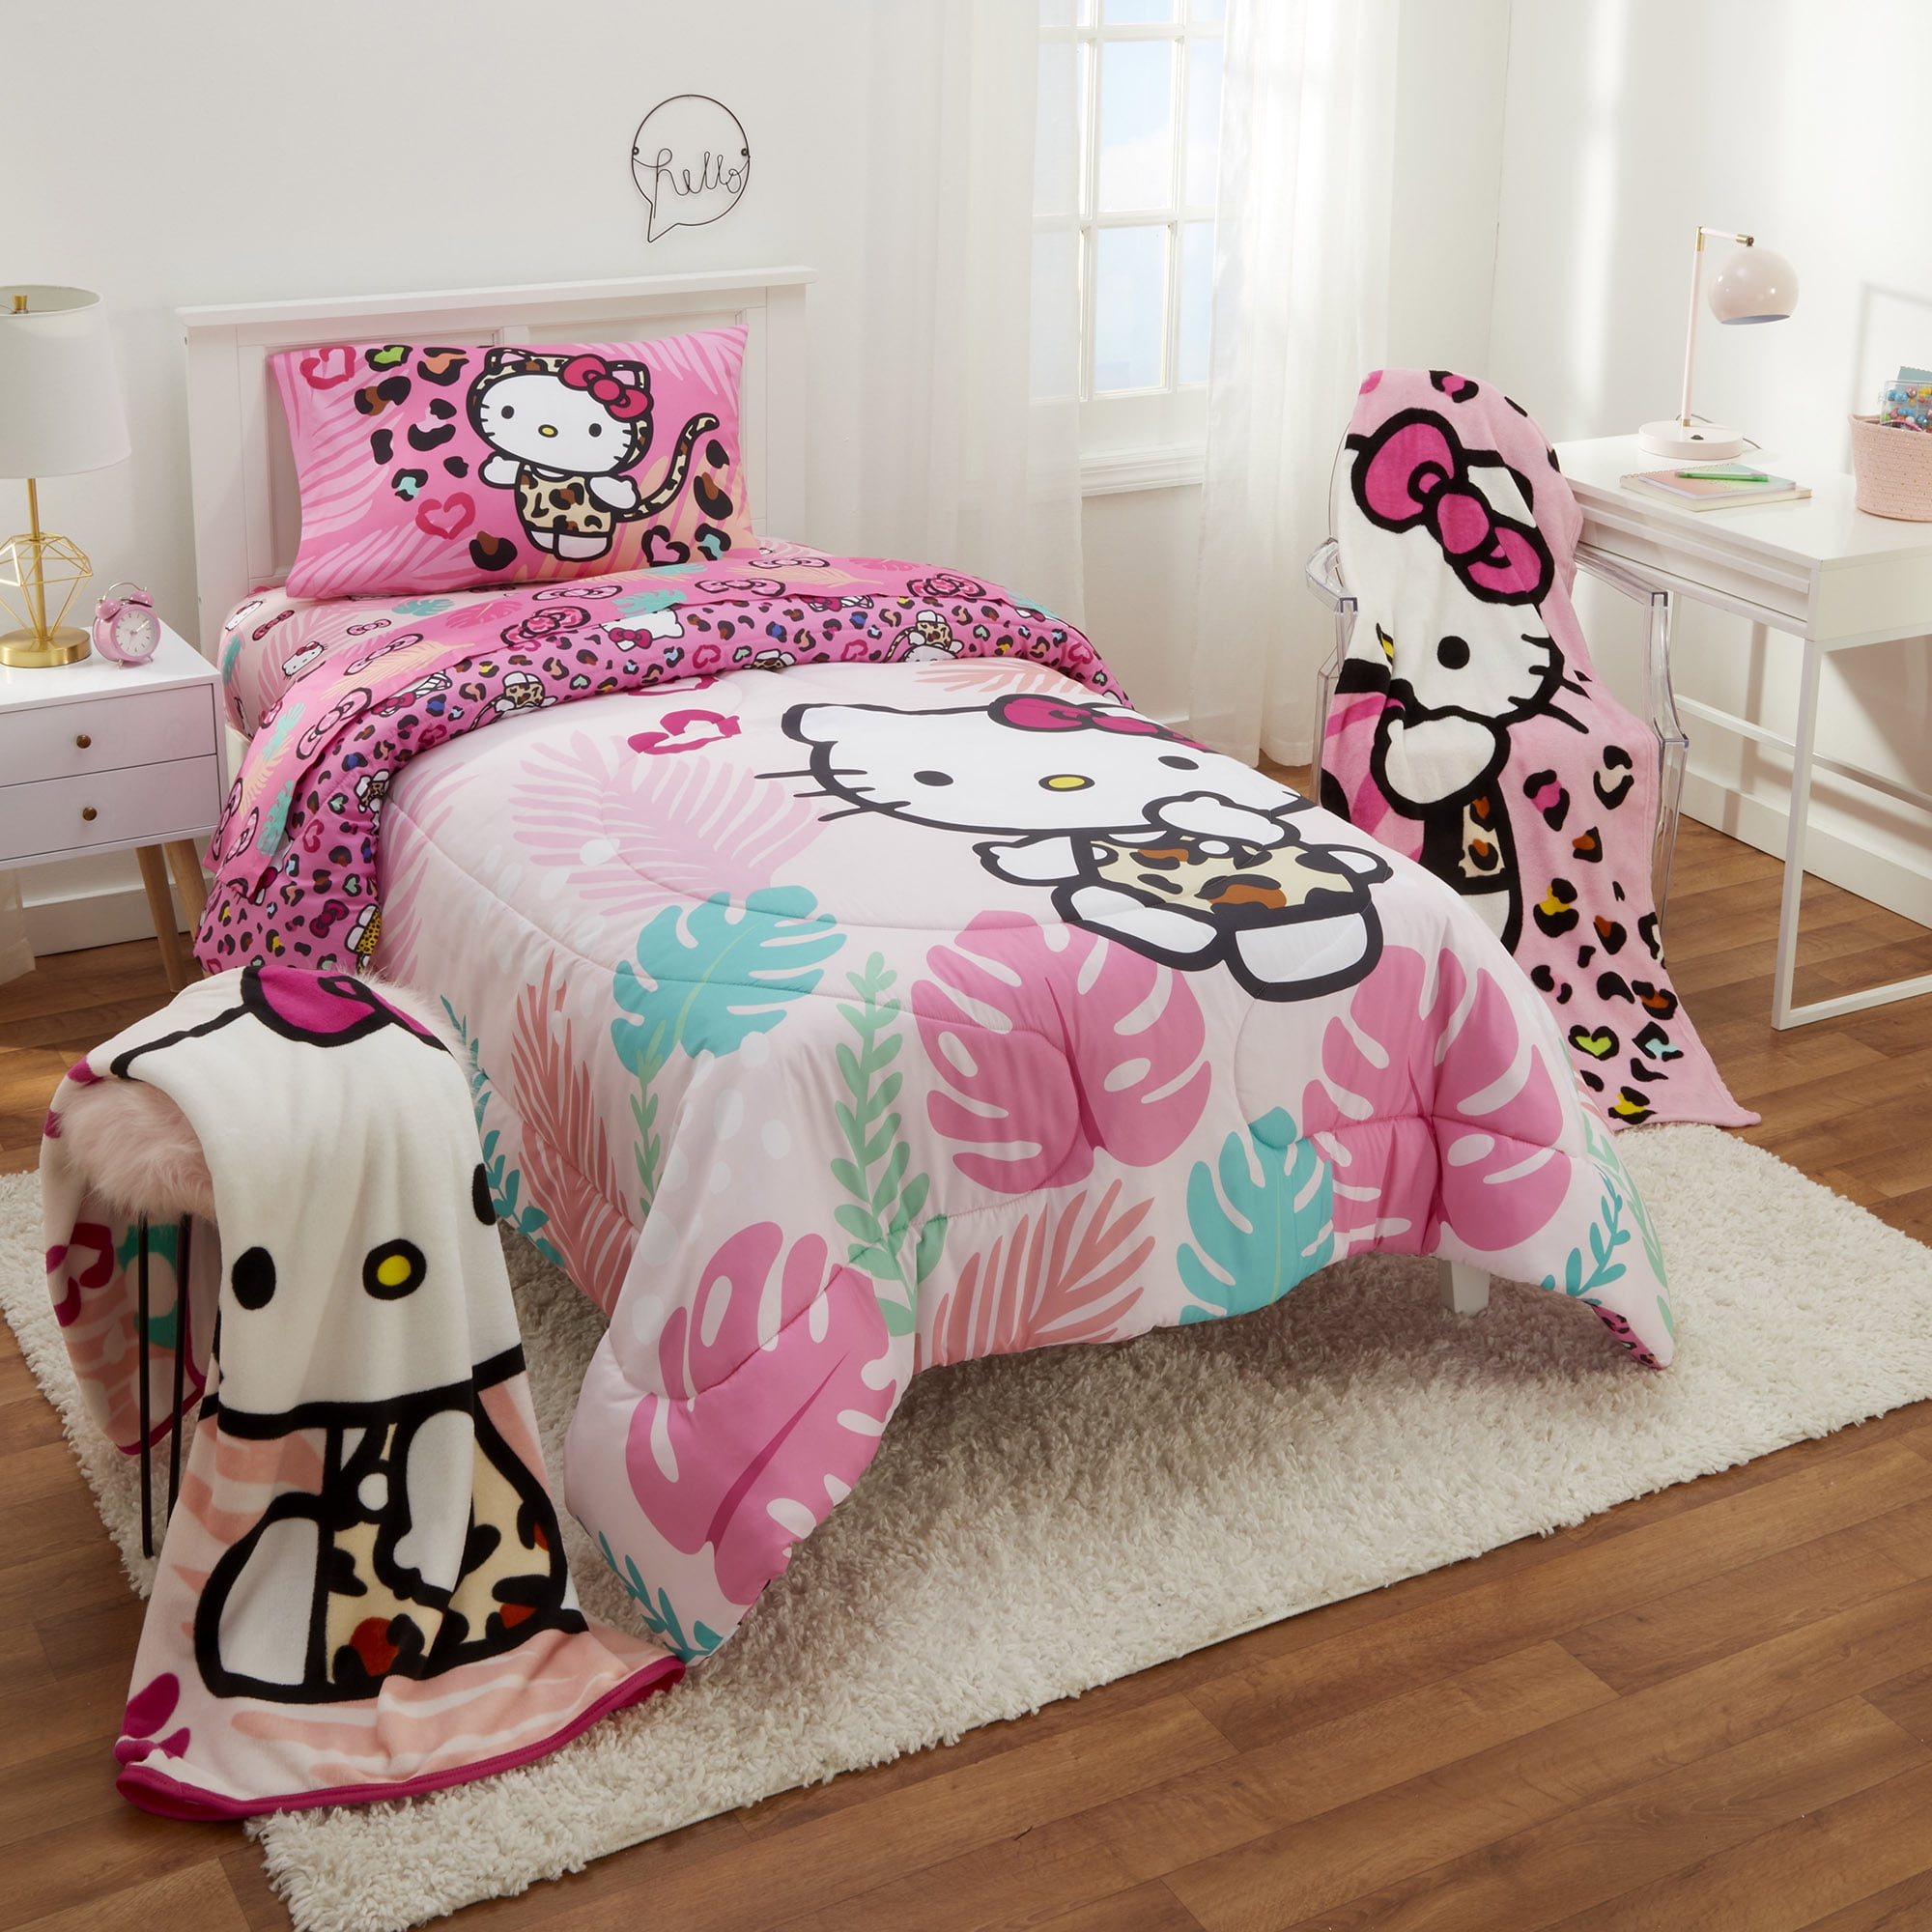 Northwest Hello Kitty Blanket Cartoon Painting (45X 60), Hello Kitty  Bedroom Decor Bundle with Stickers and More for Kids Toddlers Children, Hello Kitty Plush Blanket